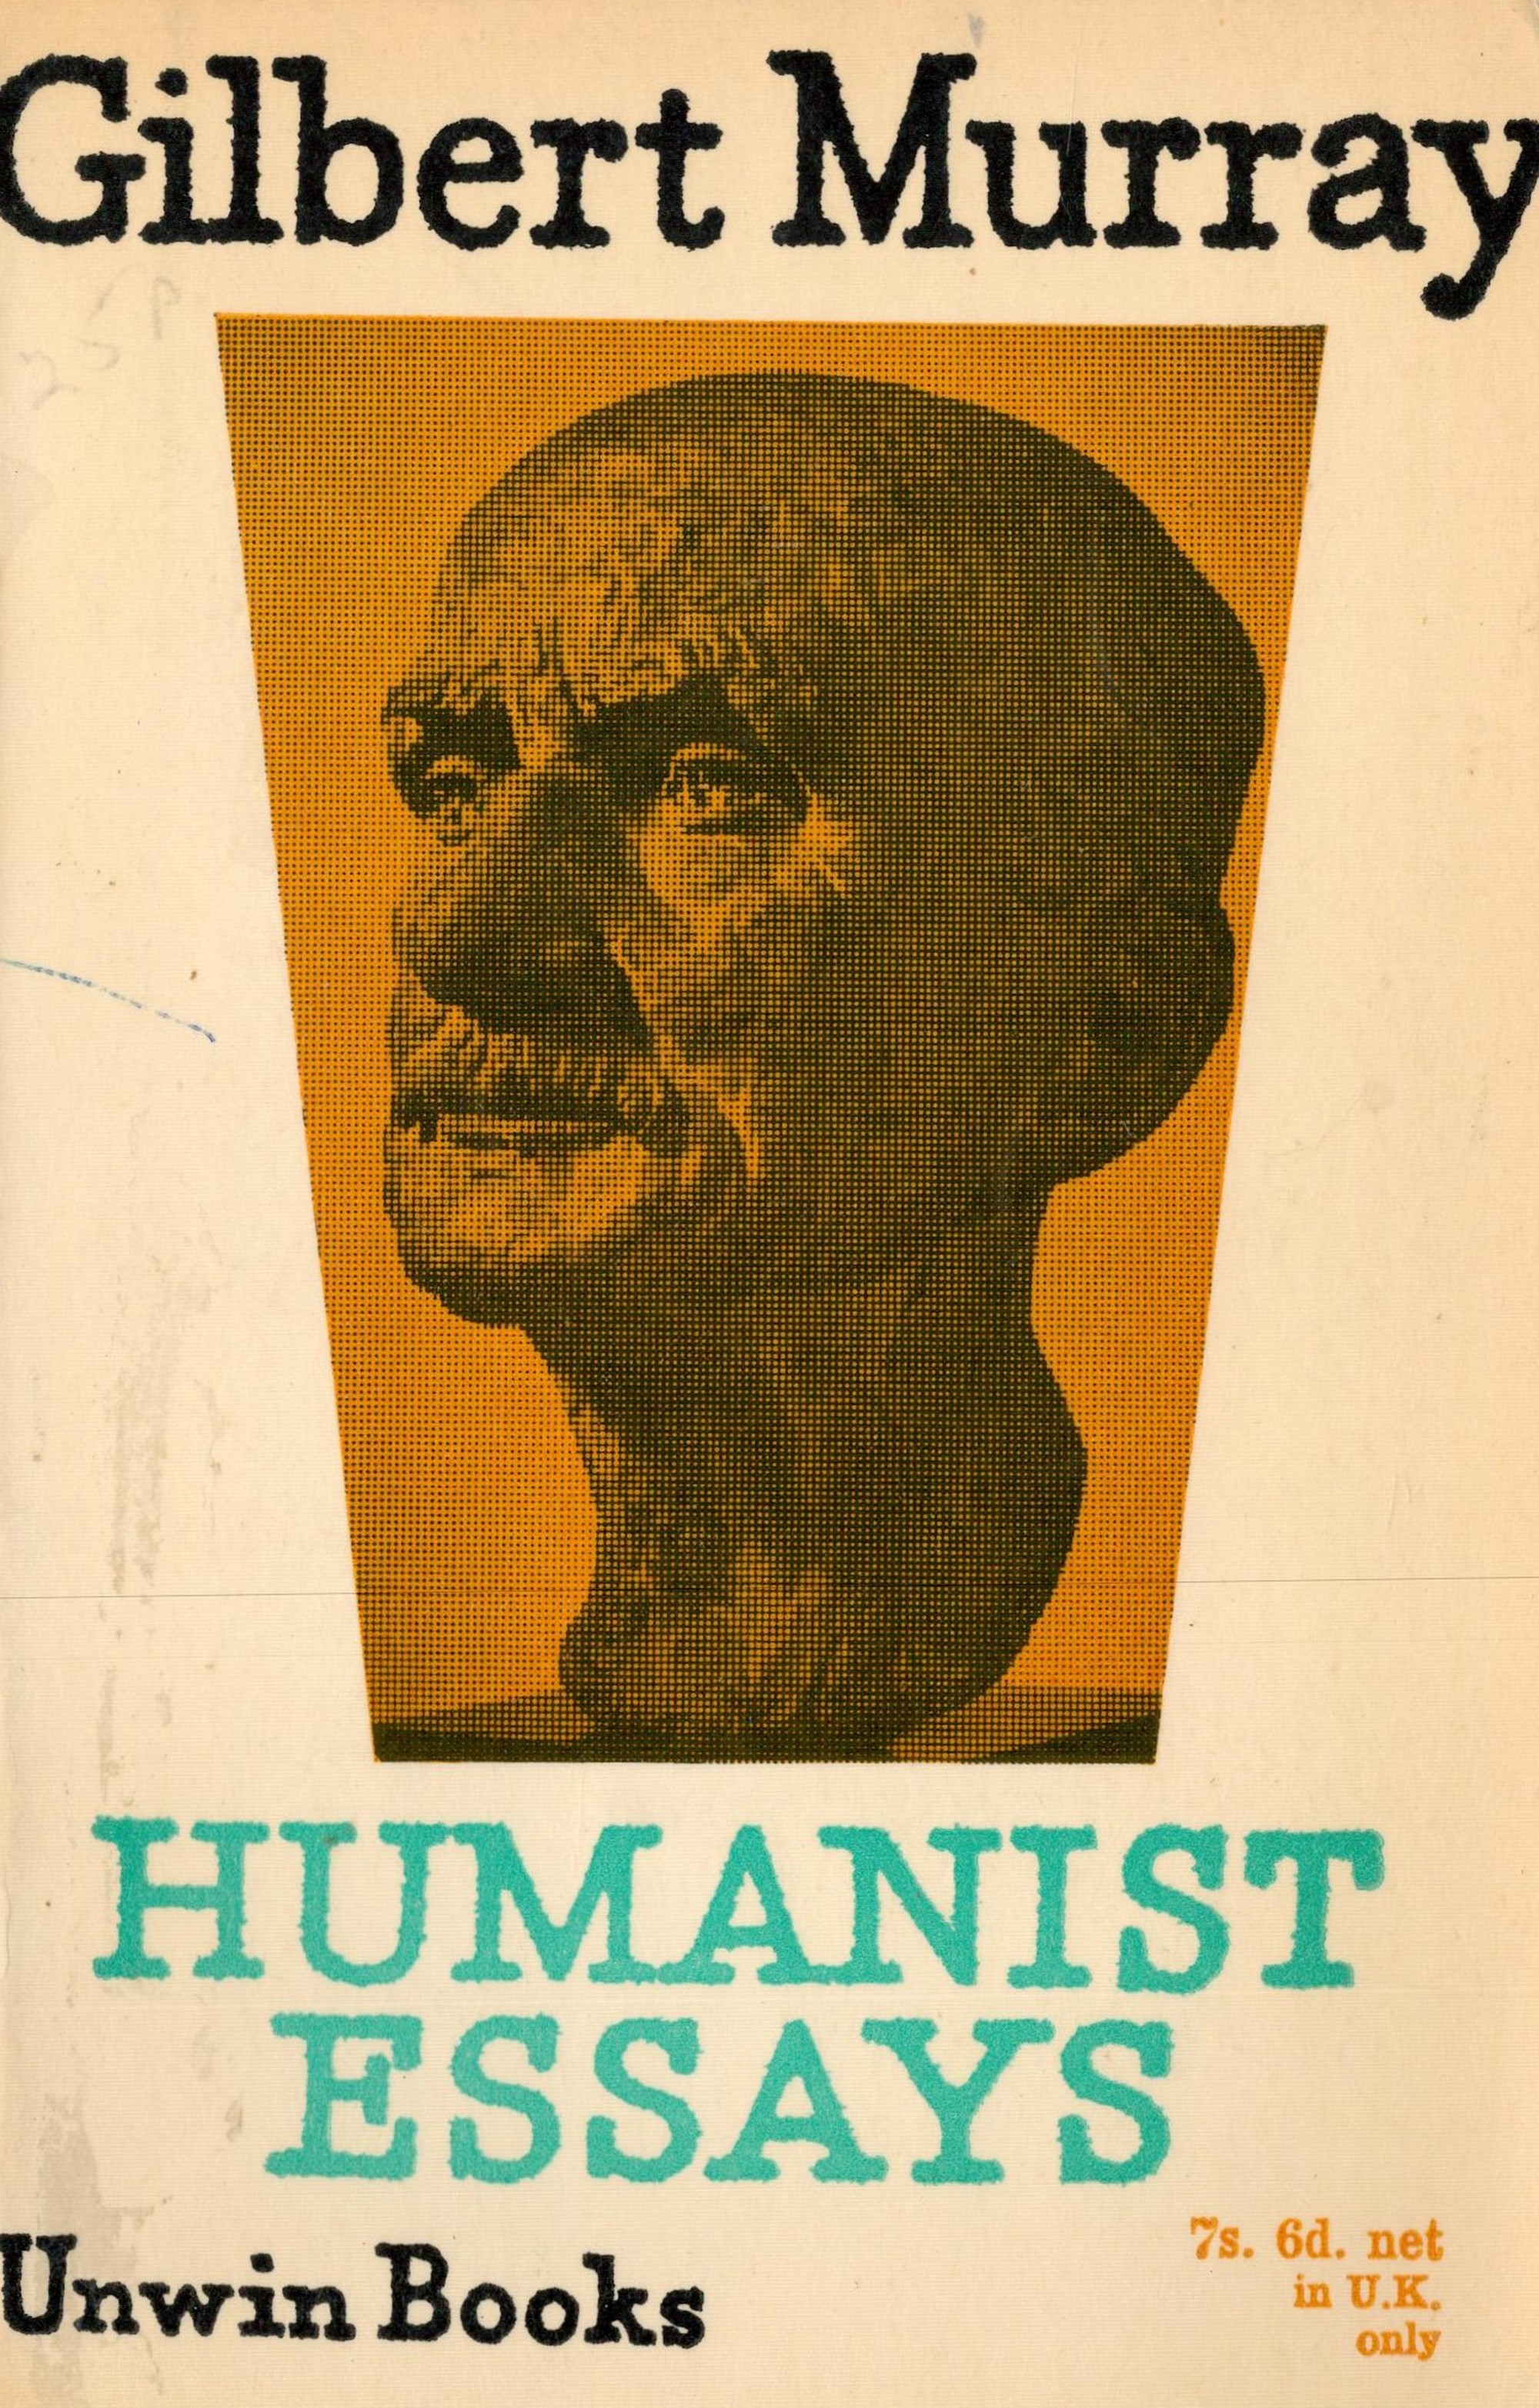 Humanist Essays by Gilbert Murray Softback Book 1964 First Edition published by Unwin Books (